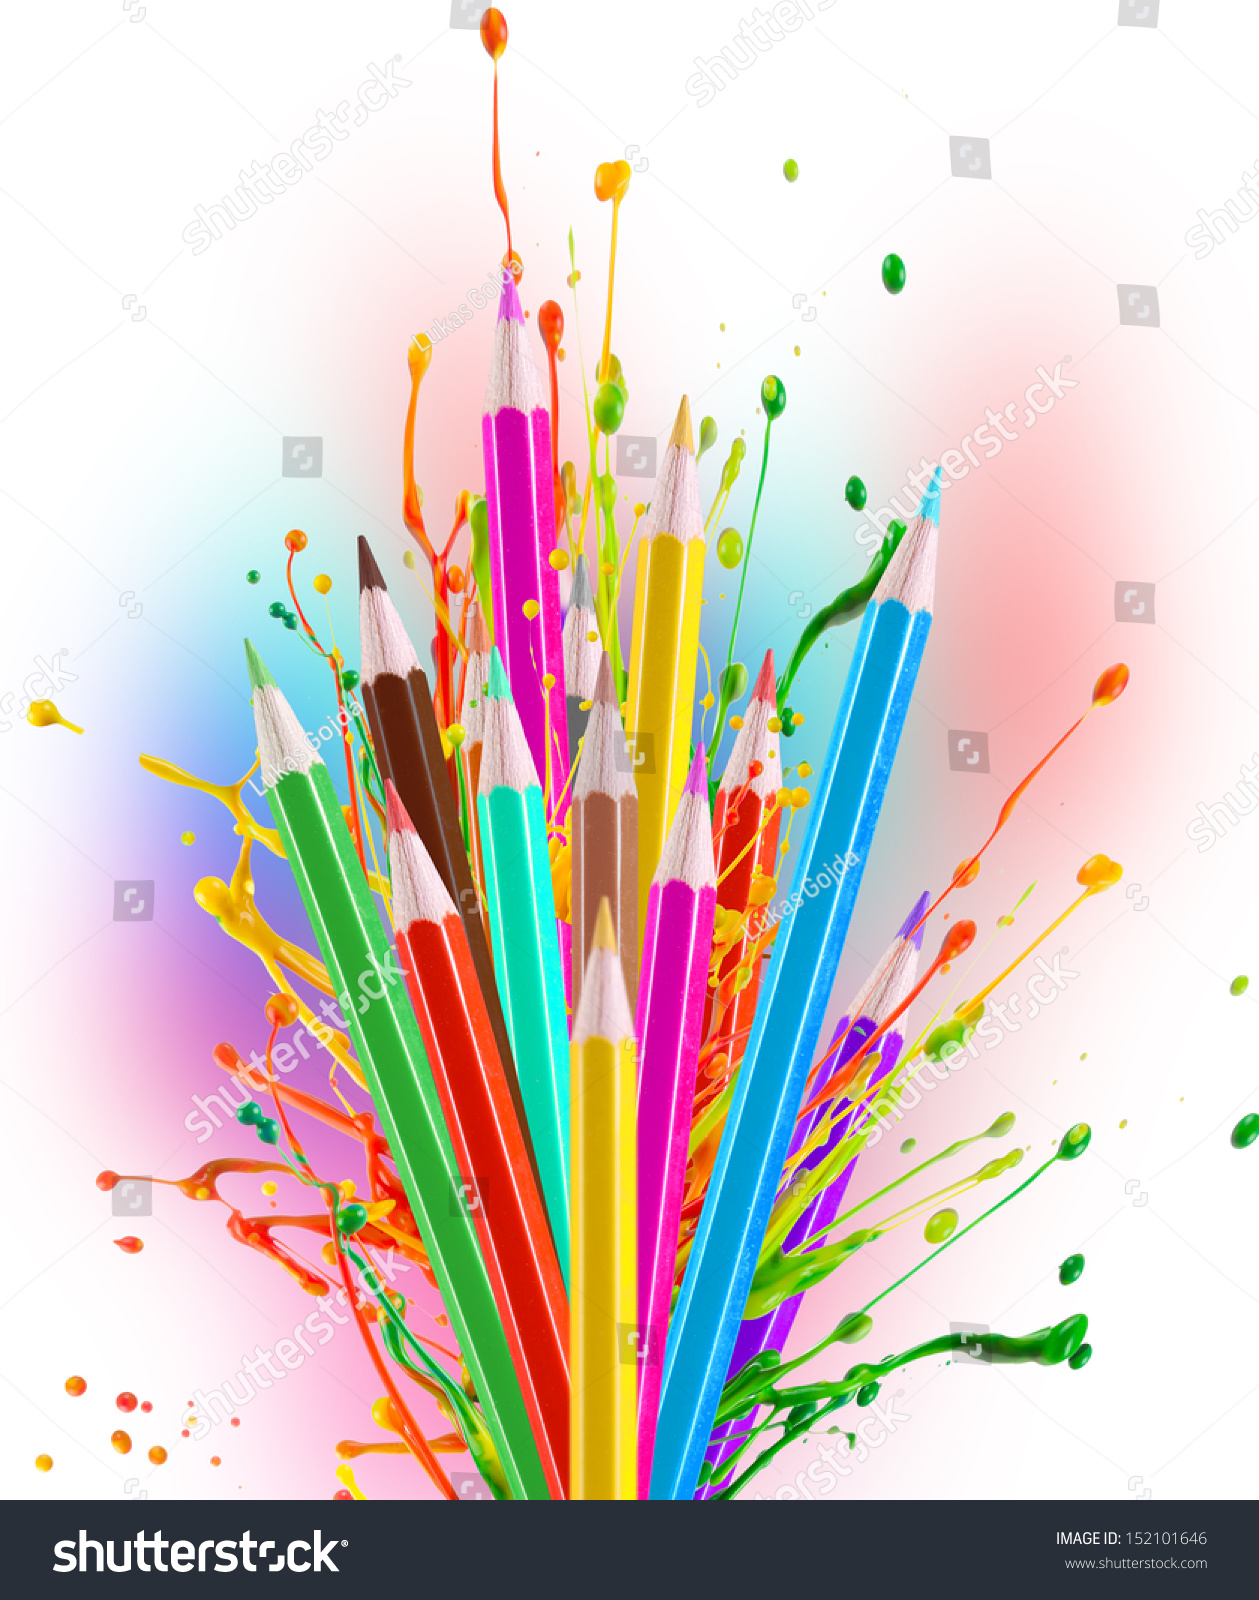 Colour pencils isolated on white background close up #152101646